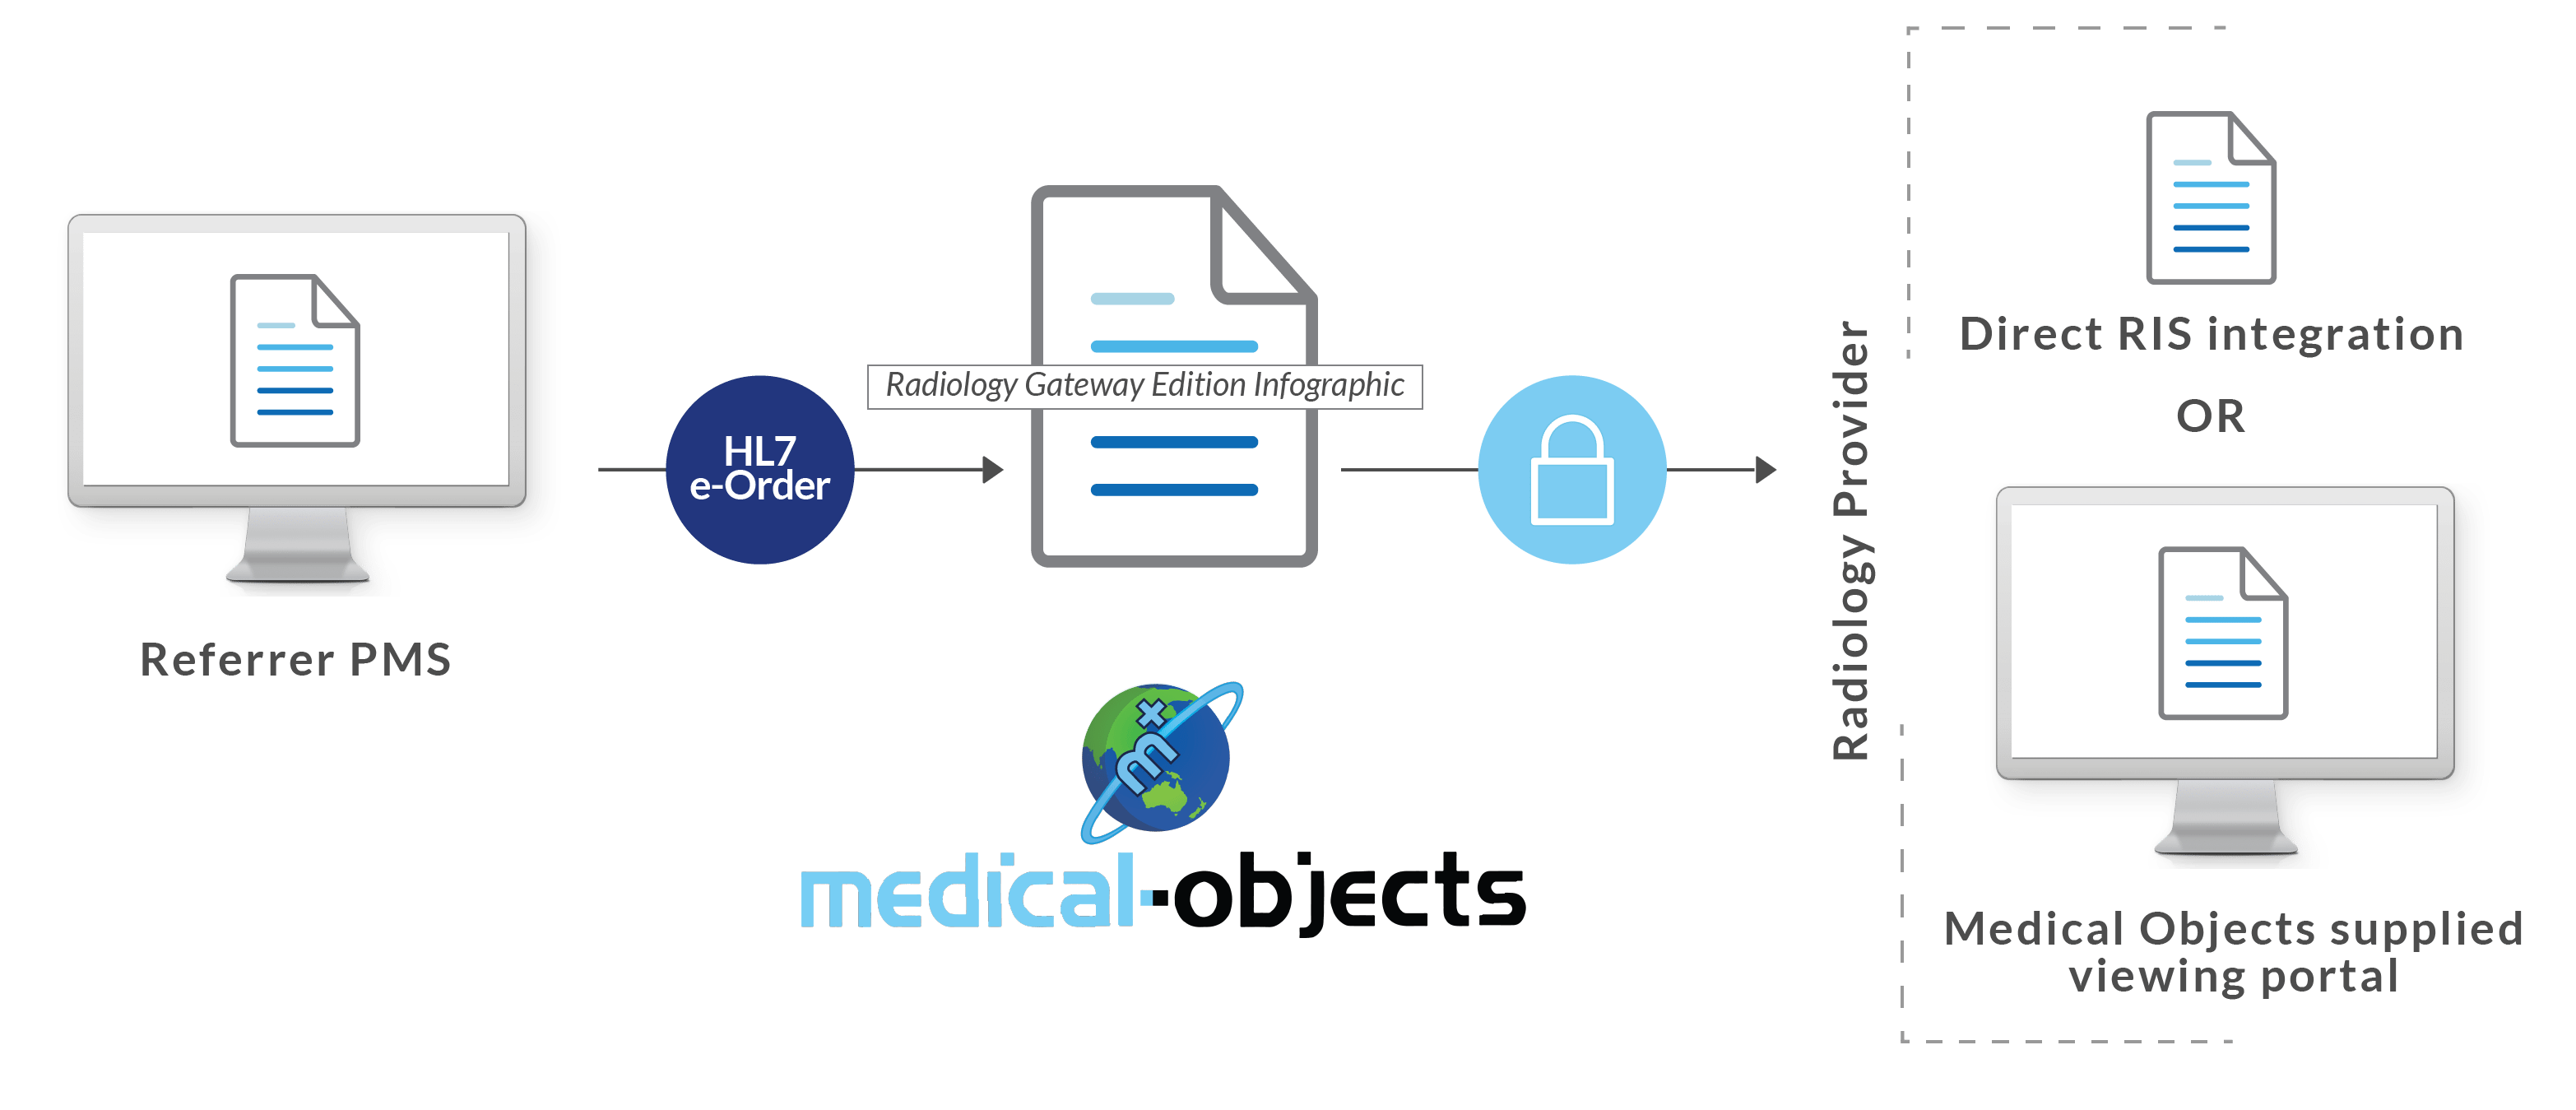 Radiology Gateway Edition Infographic